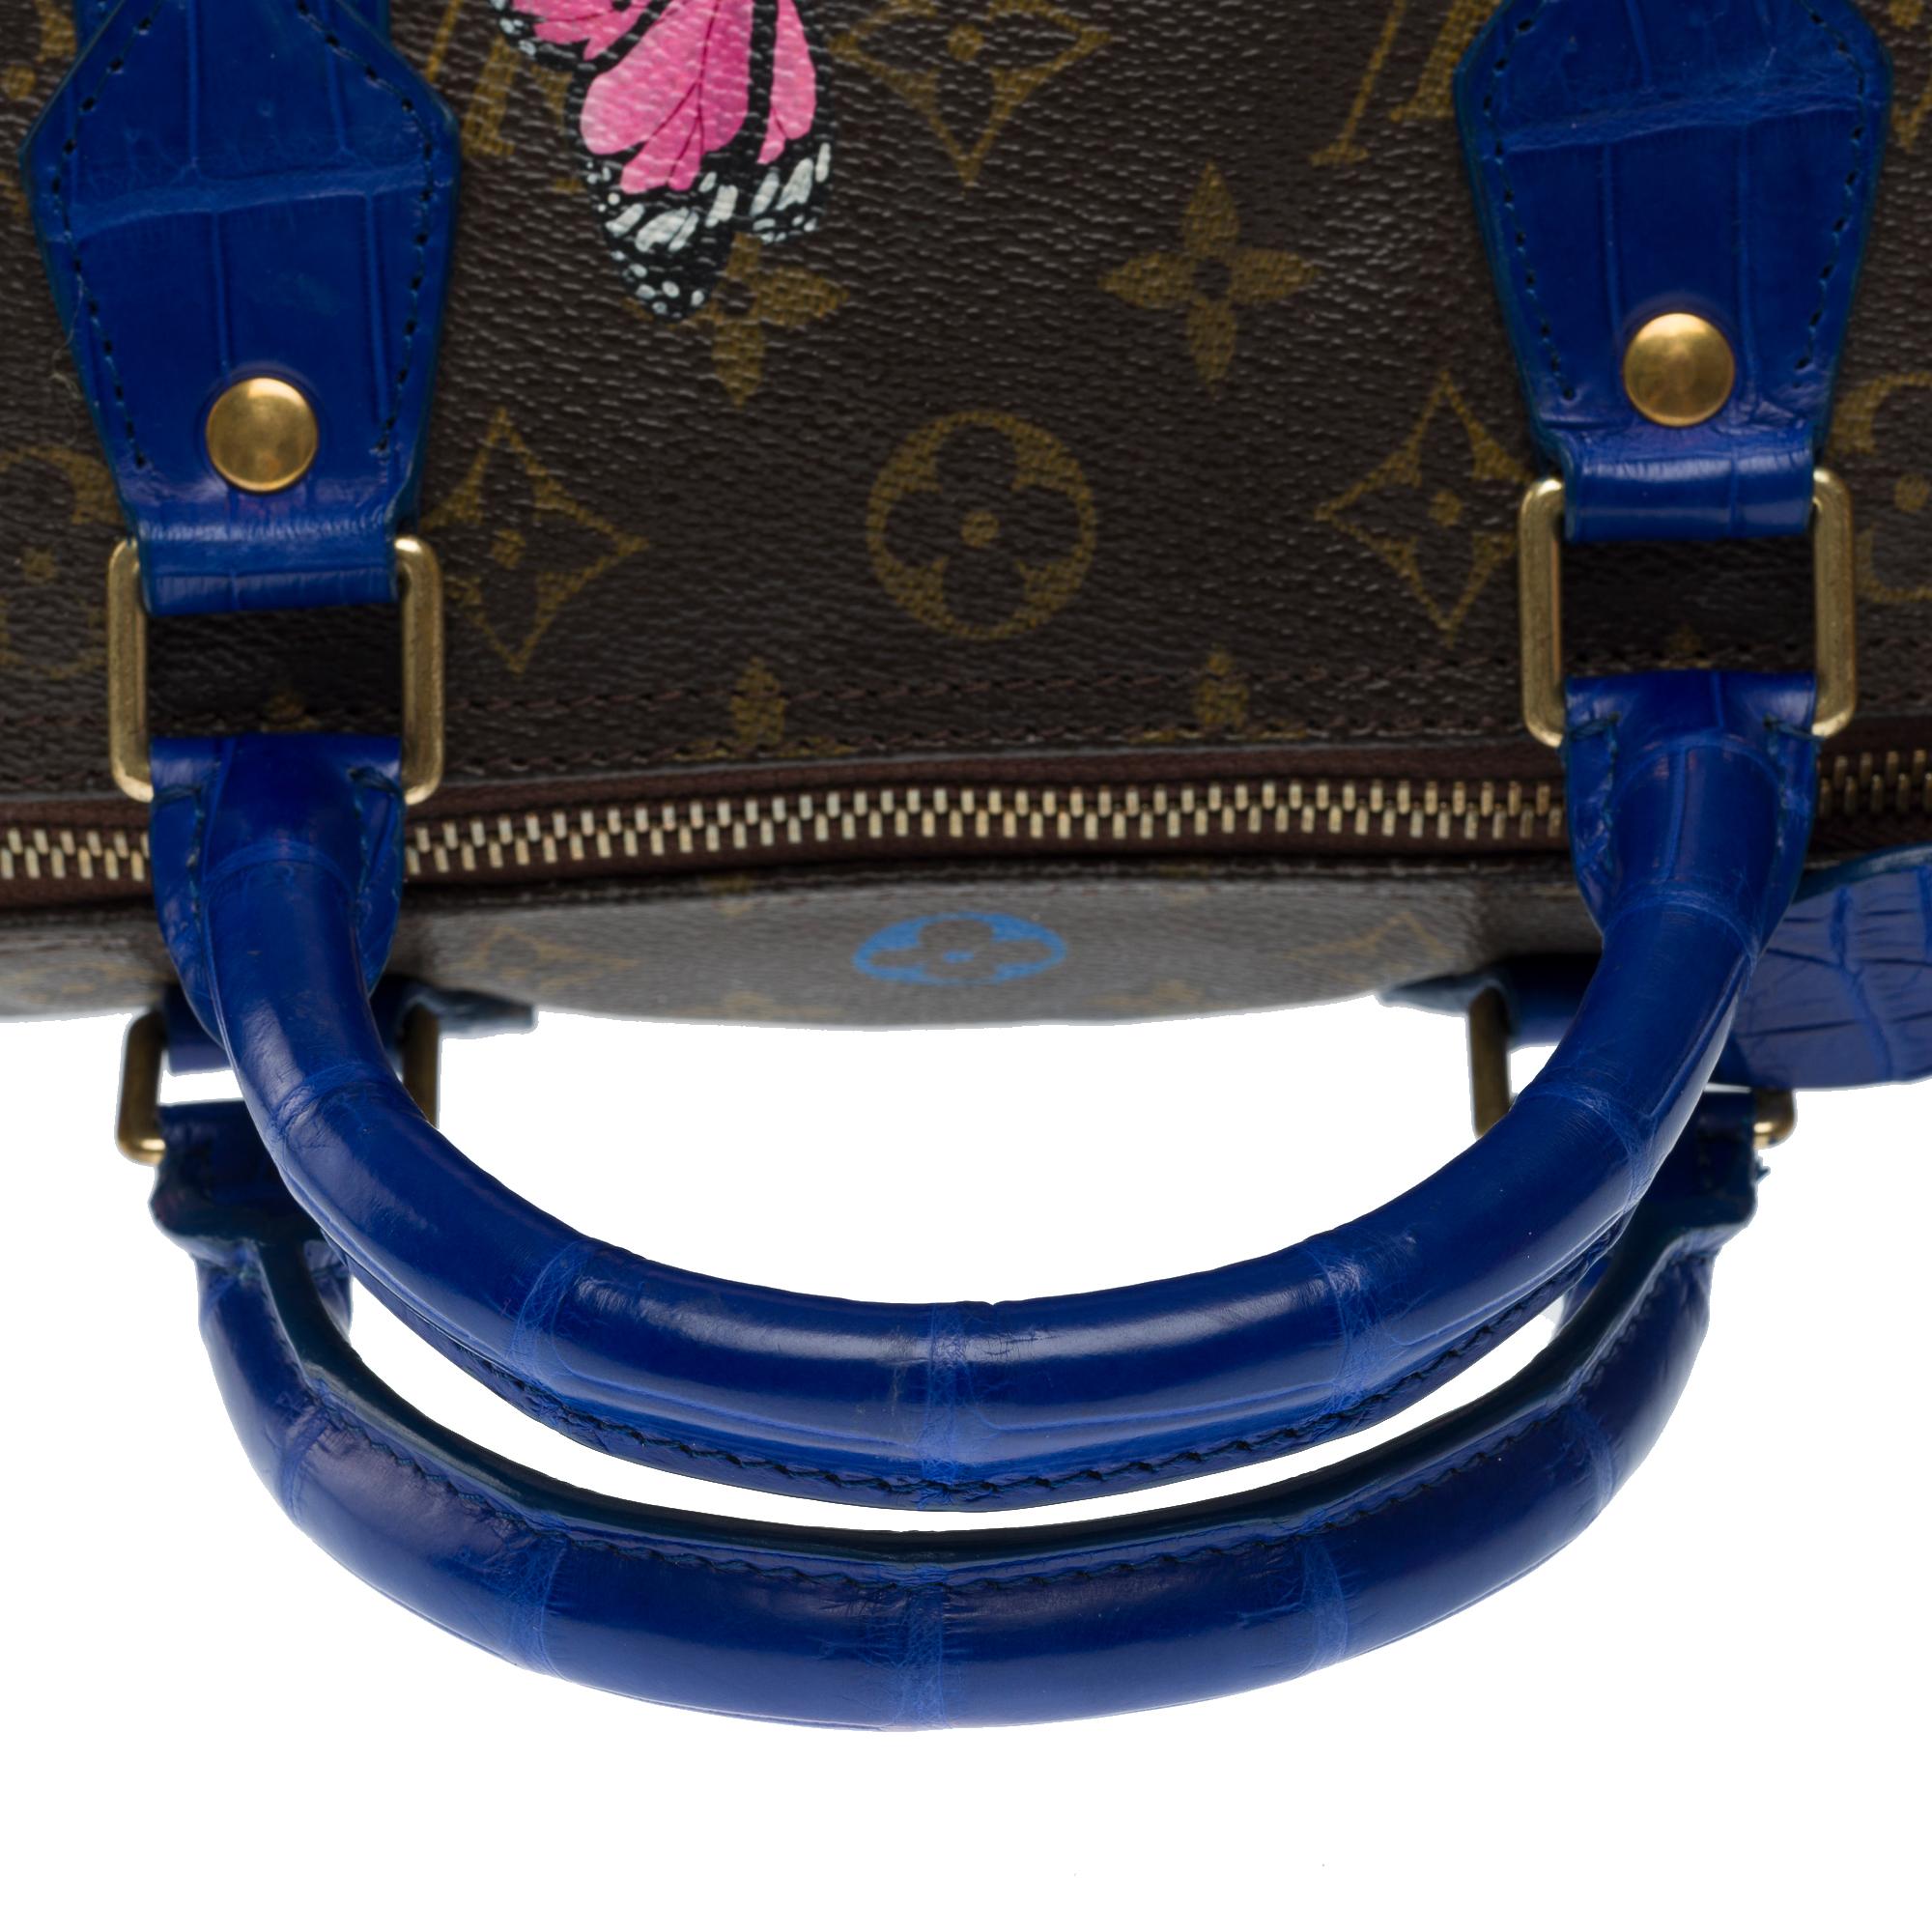 Customized Louis Vuitton Speedy 30 handbag Butterfly with Blue Crocodile leather For Sale 3